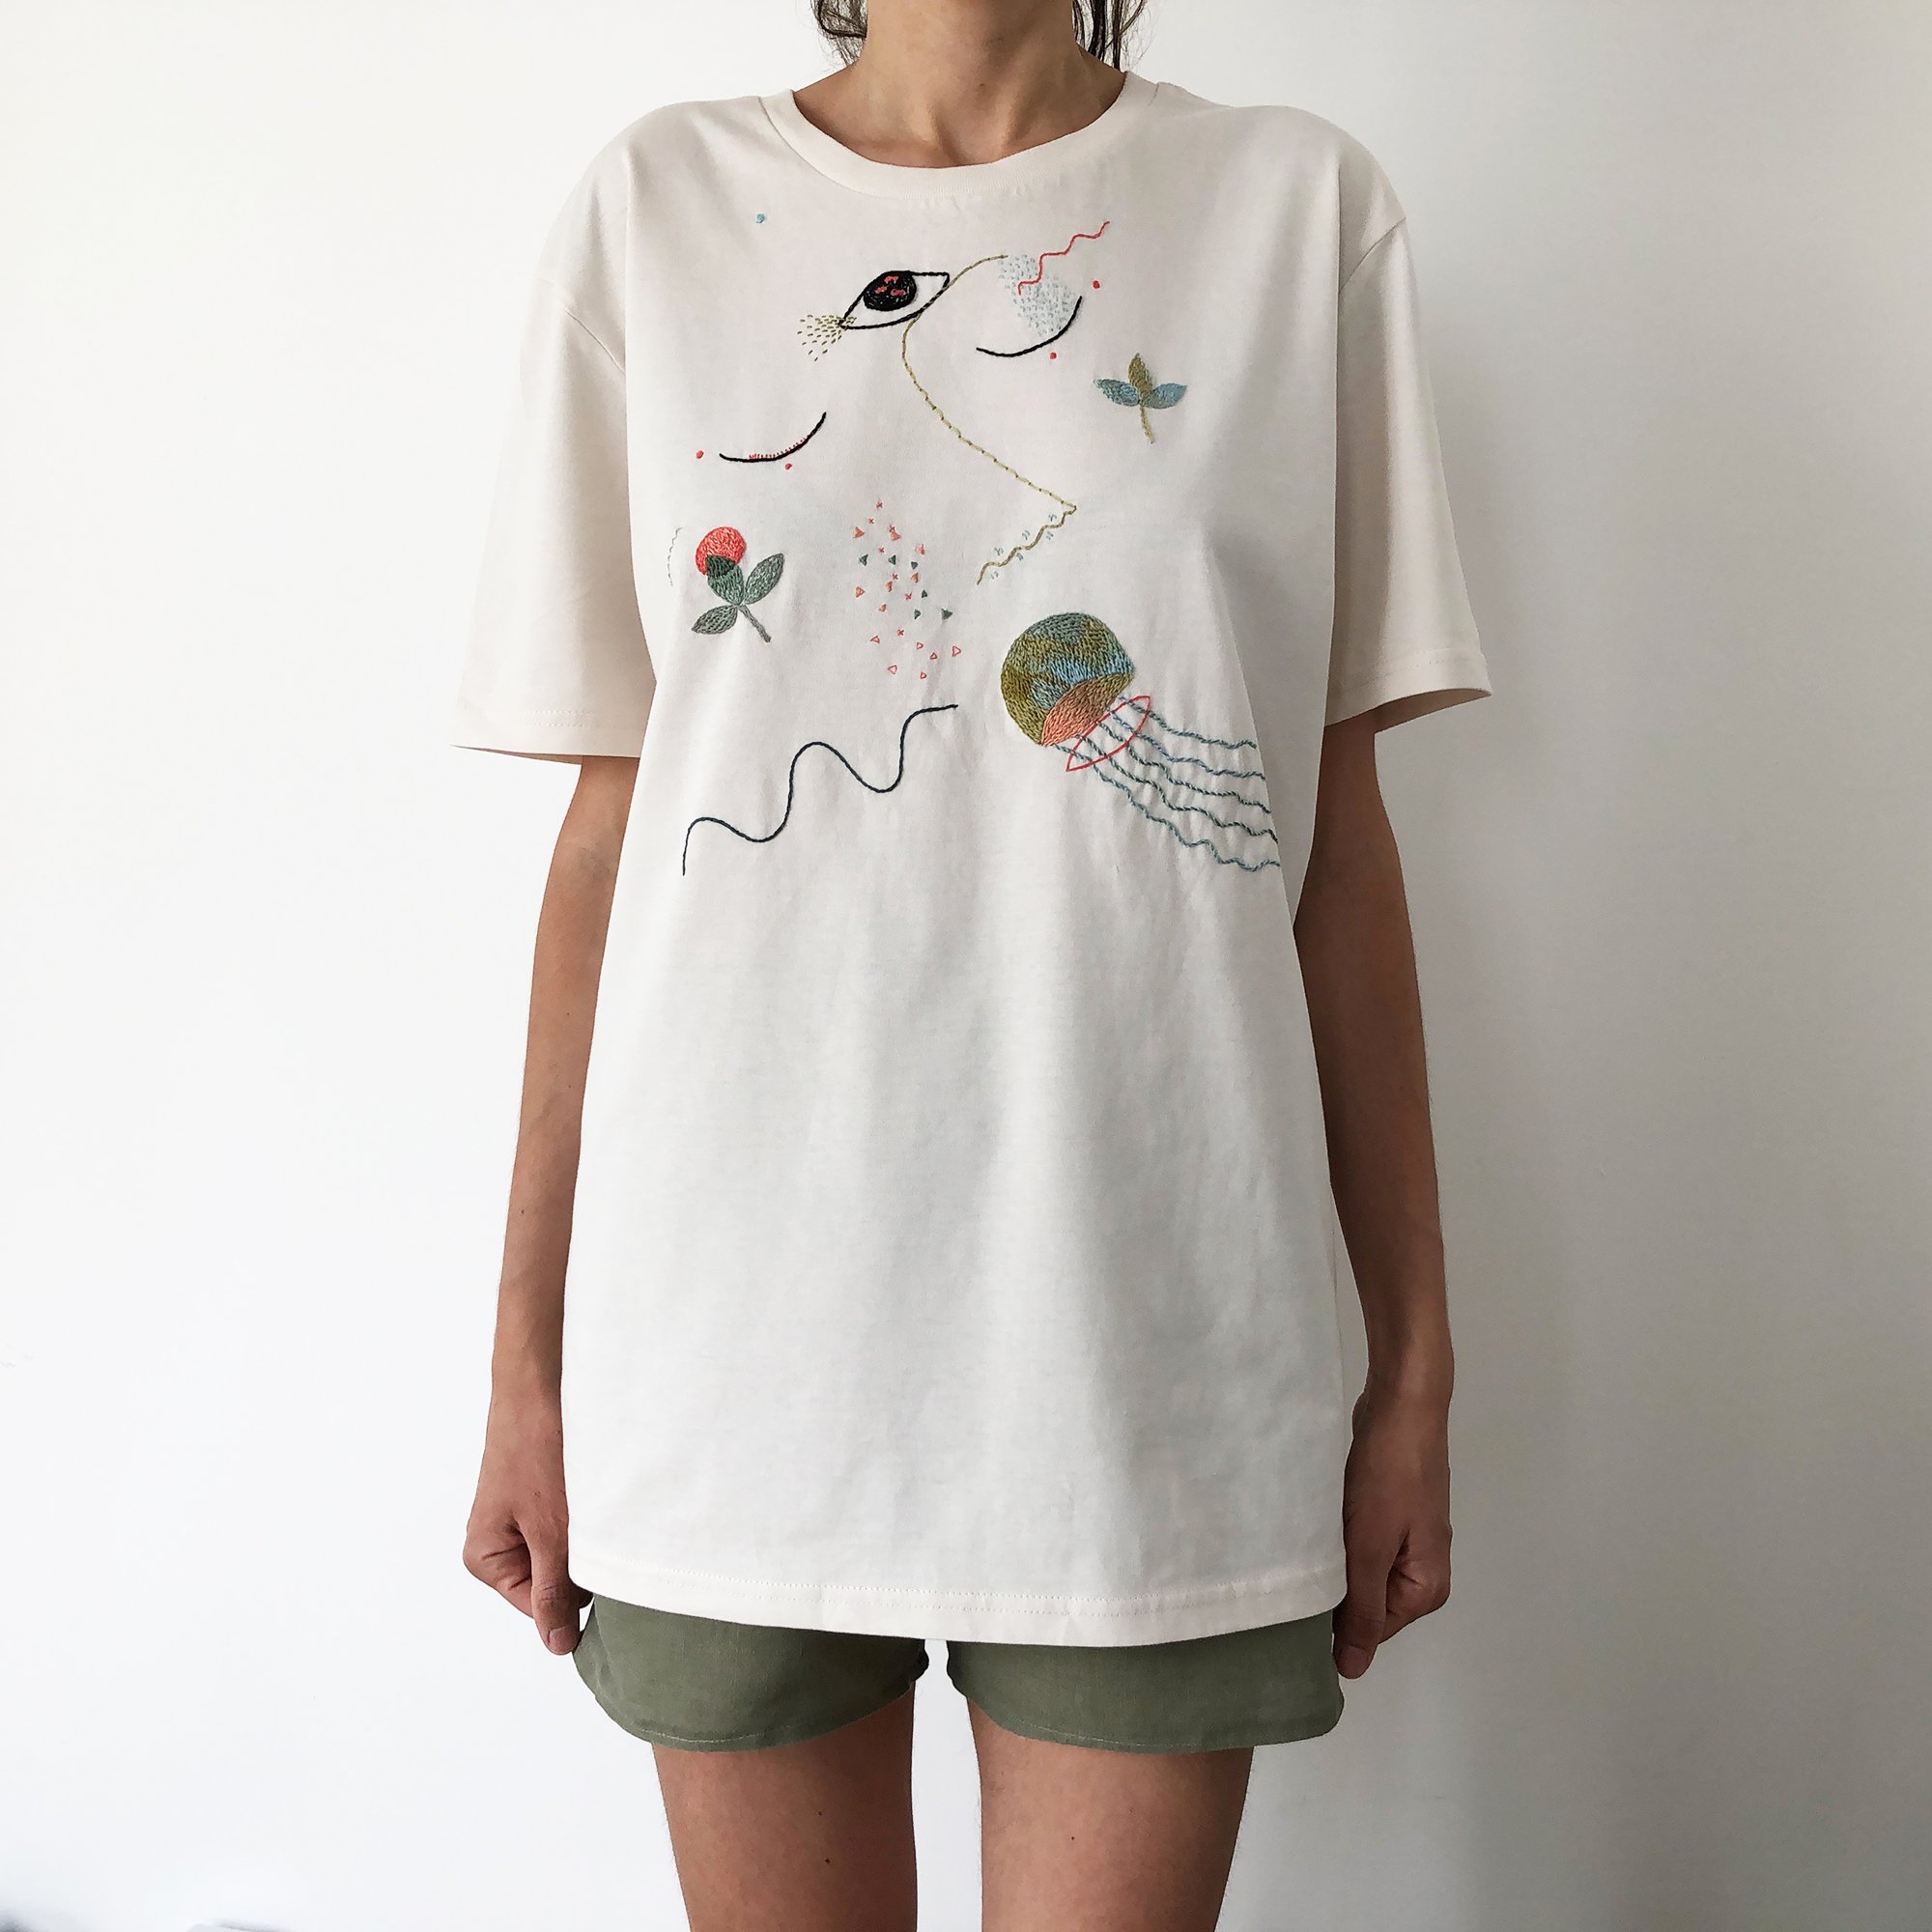 Day dreaming of the sea - hand embroidered organic cotton t-shirt ...